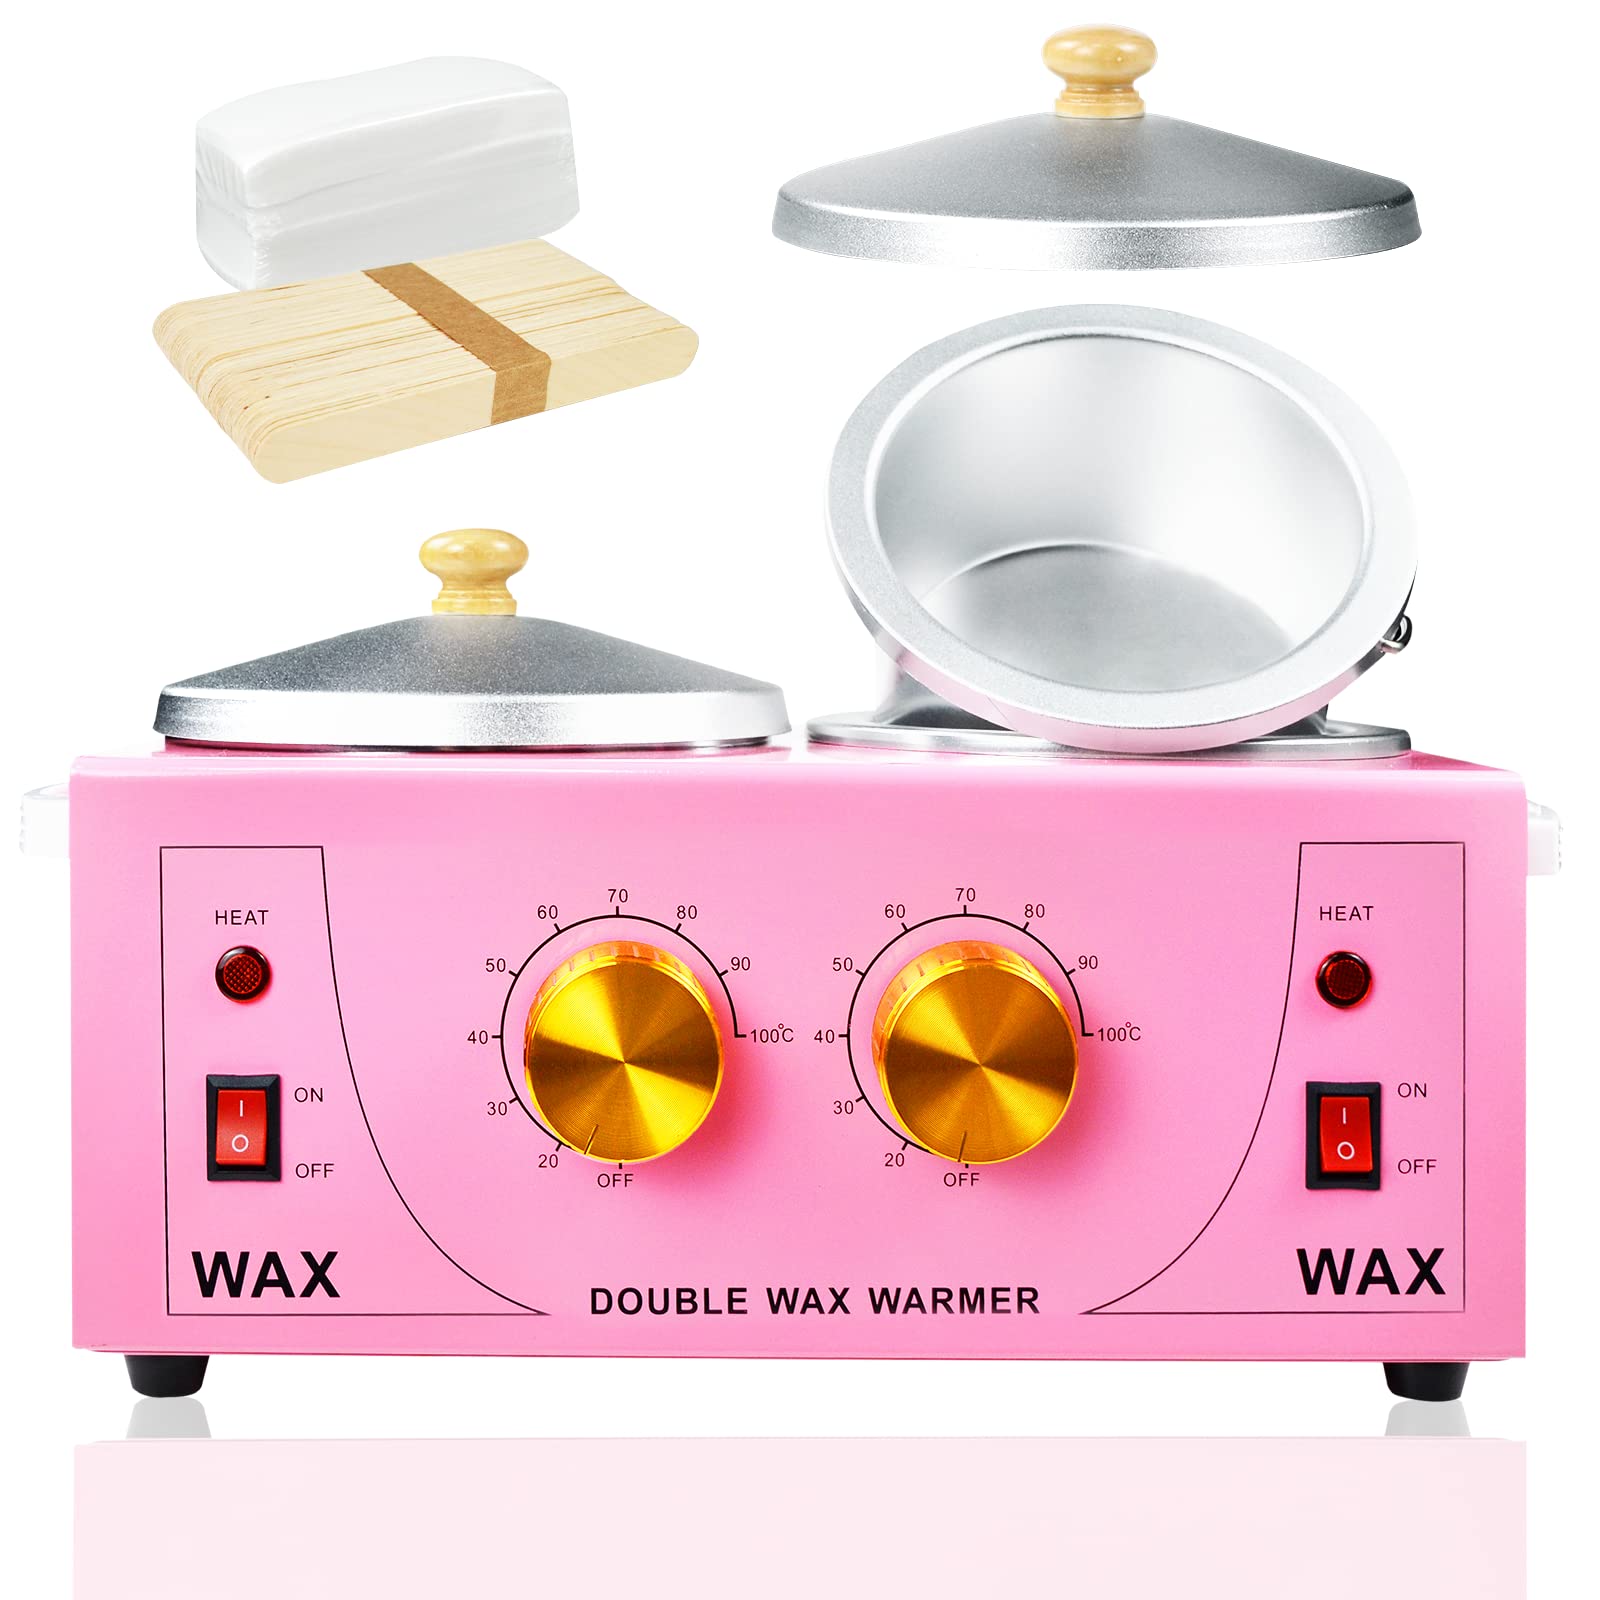 Double Wax Warmer Electric Wax Warmer Professional Machine for Hair  Removal, Wax Heater for Paraffin Facial